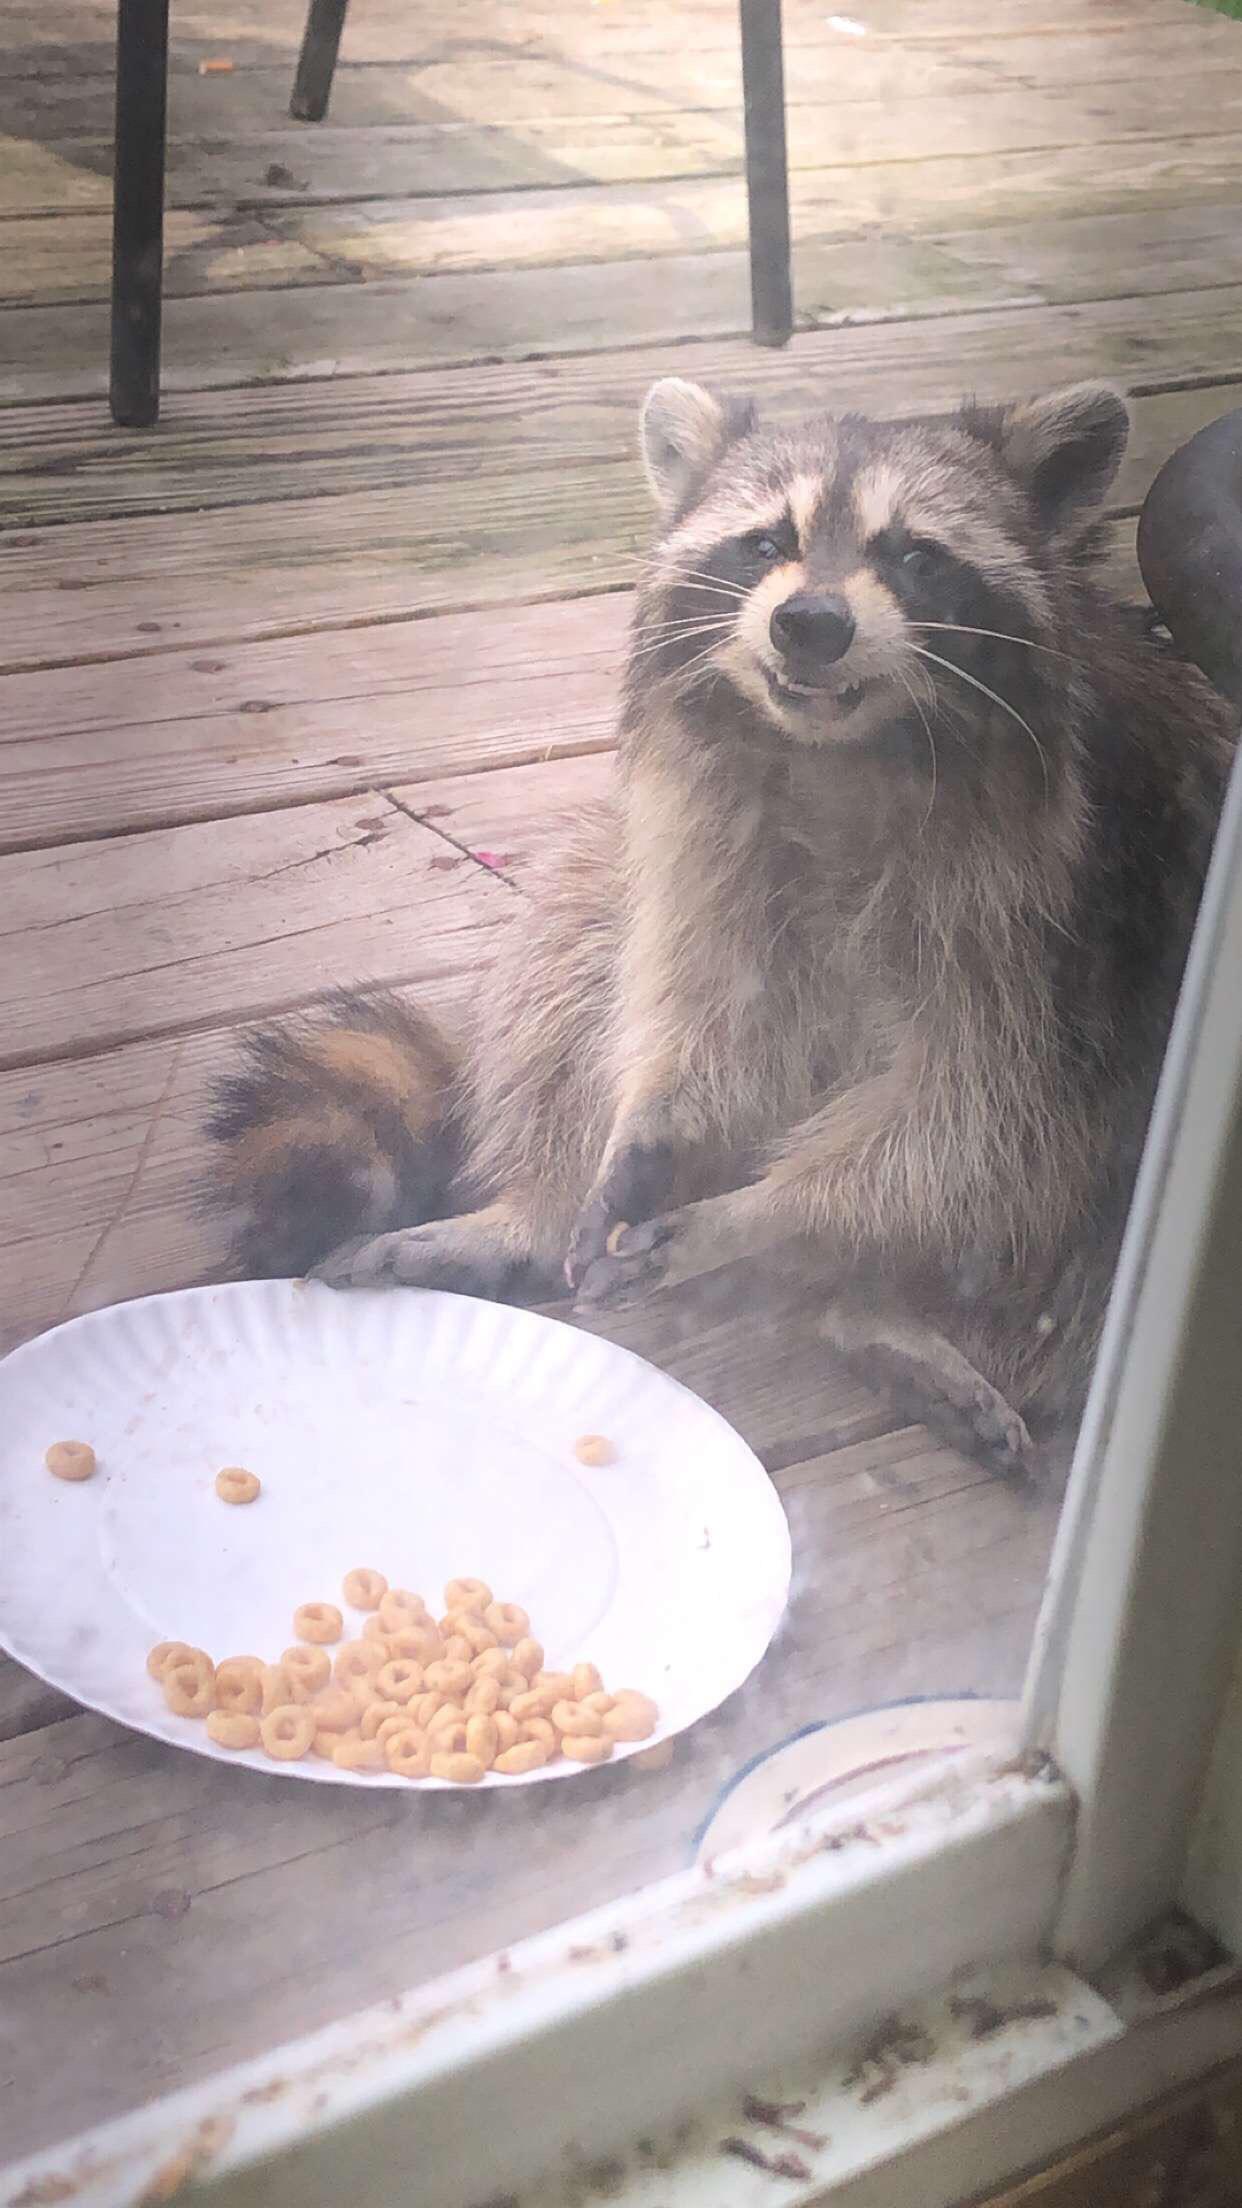 The cereal pleases the raccoon. 